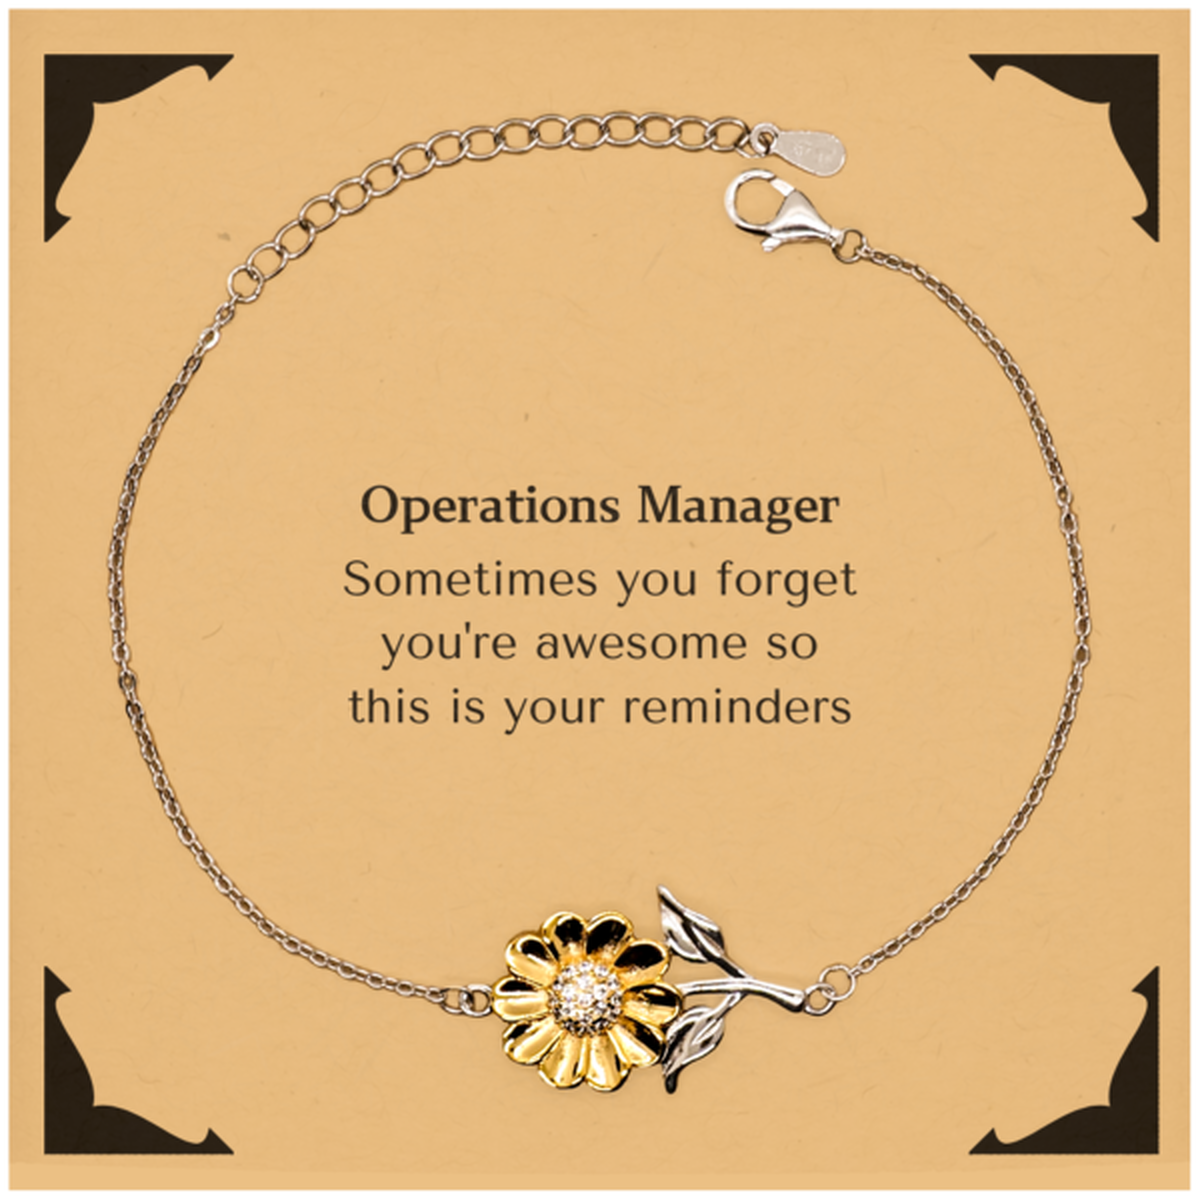 Sentimental Operations Manager Sunflower Bracelet, Operations Manager Sometimes you forget you're awesome so this is your reminders, Graduation Christmas Birthday Gifts for Operations Manager, Men, Women, Coworkers